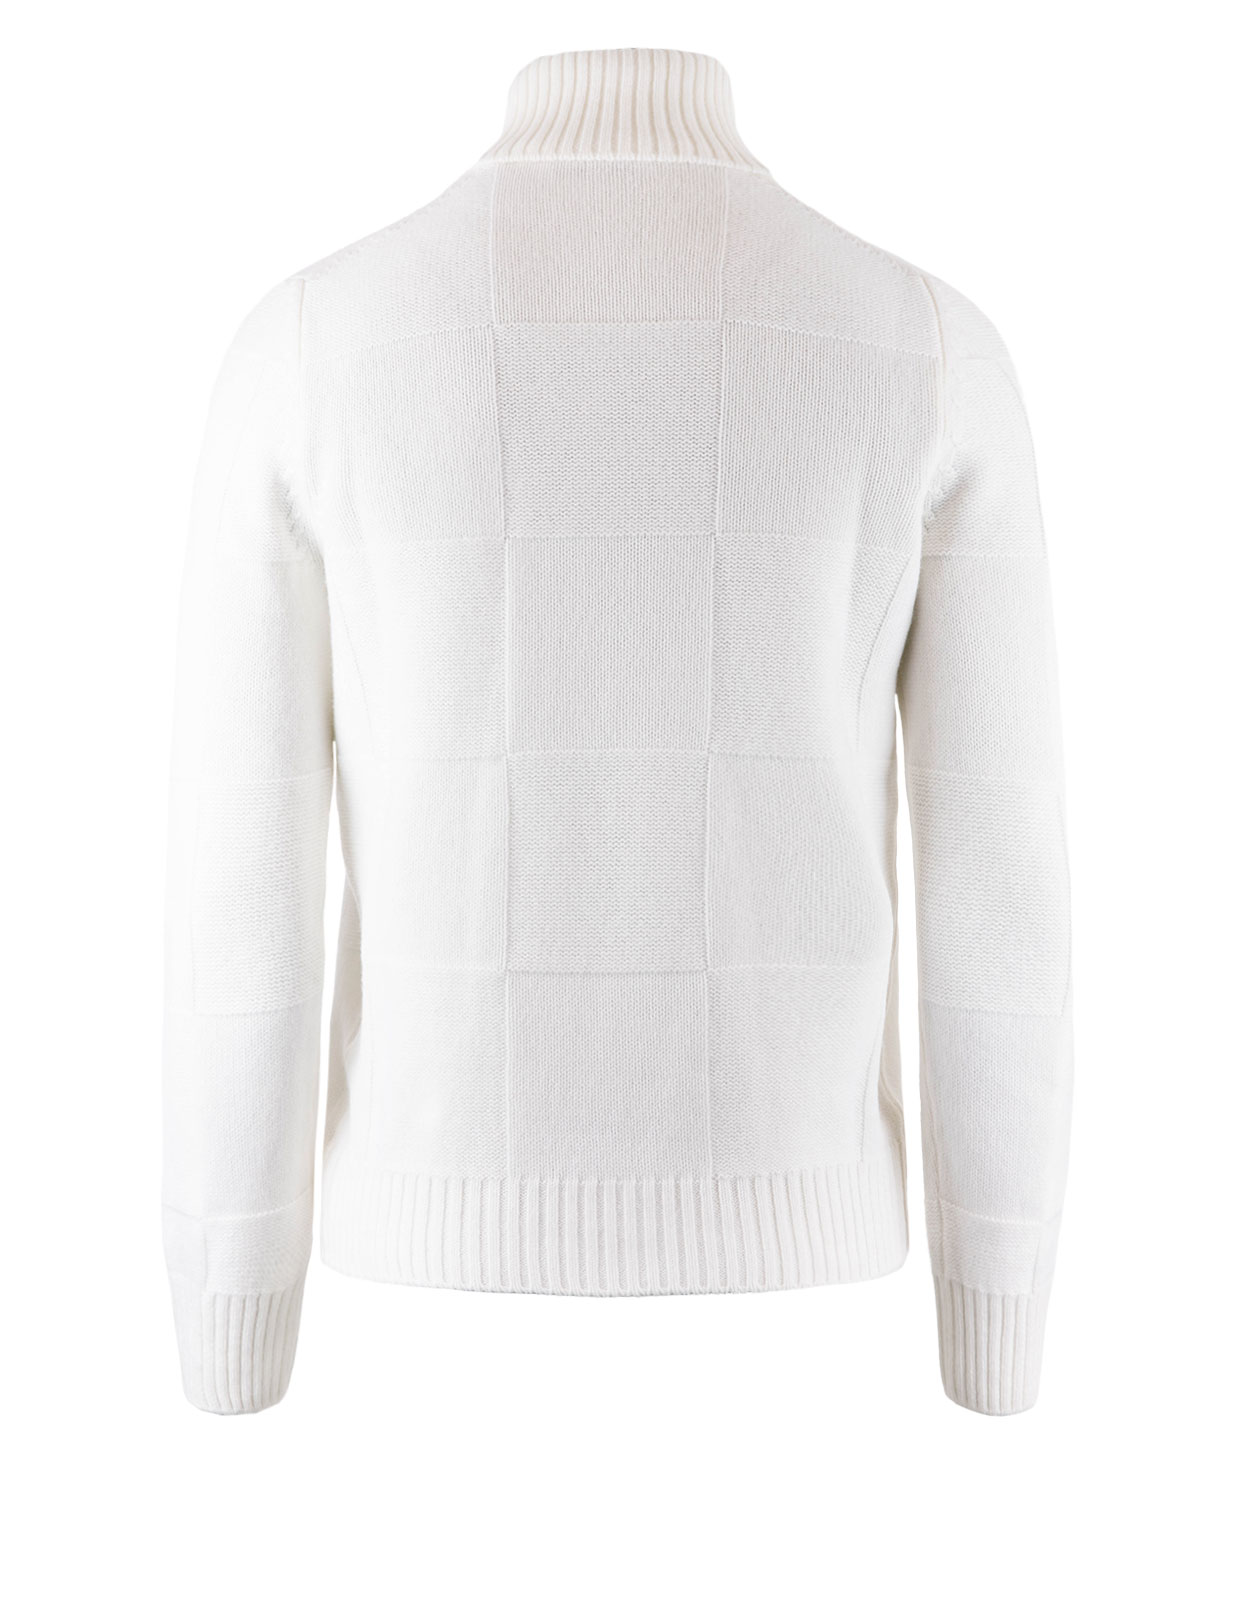 Knitted Tonal Pattern Roll Neck White